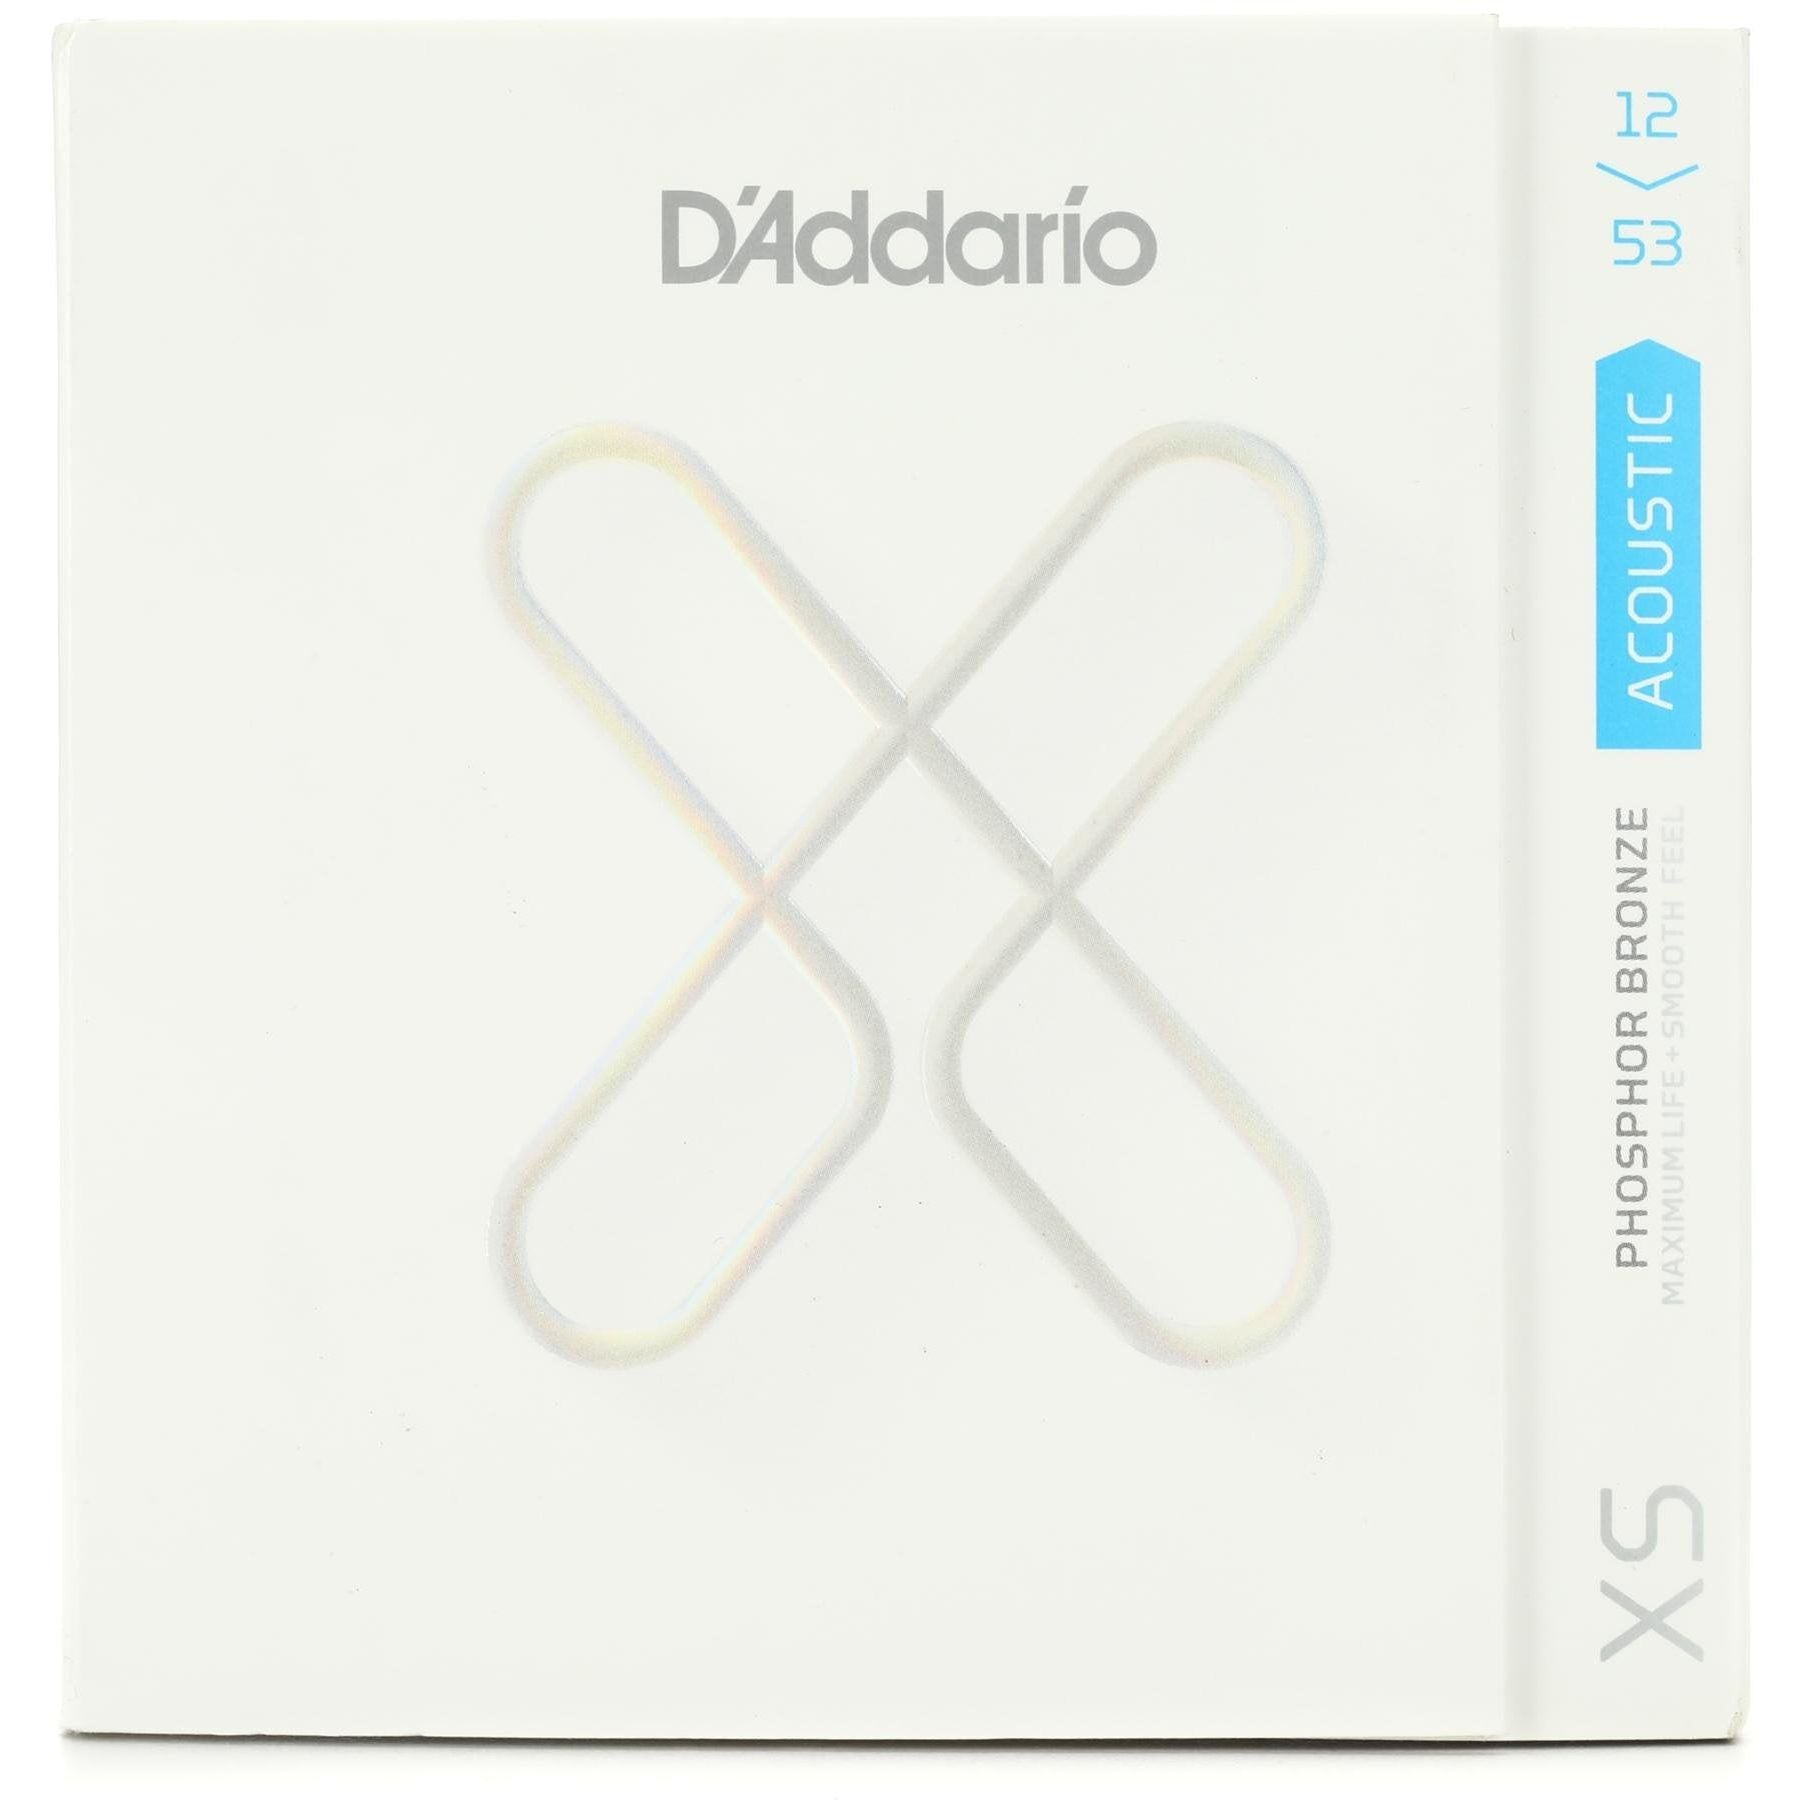 D'Addario 12-53 XS Coated Acoustic Strings